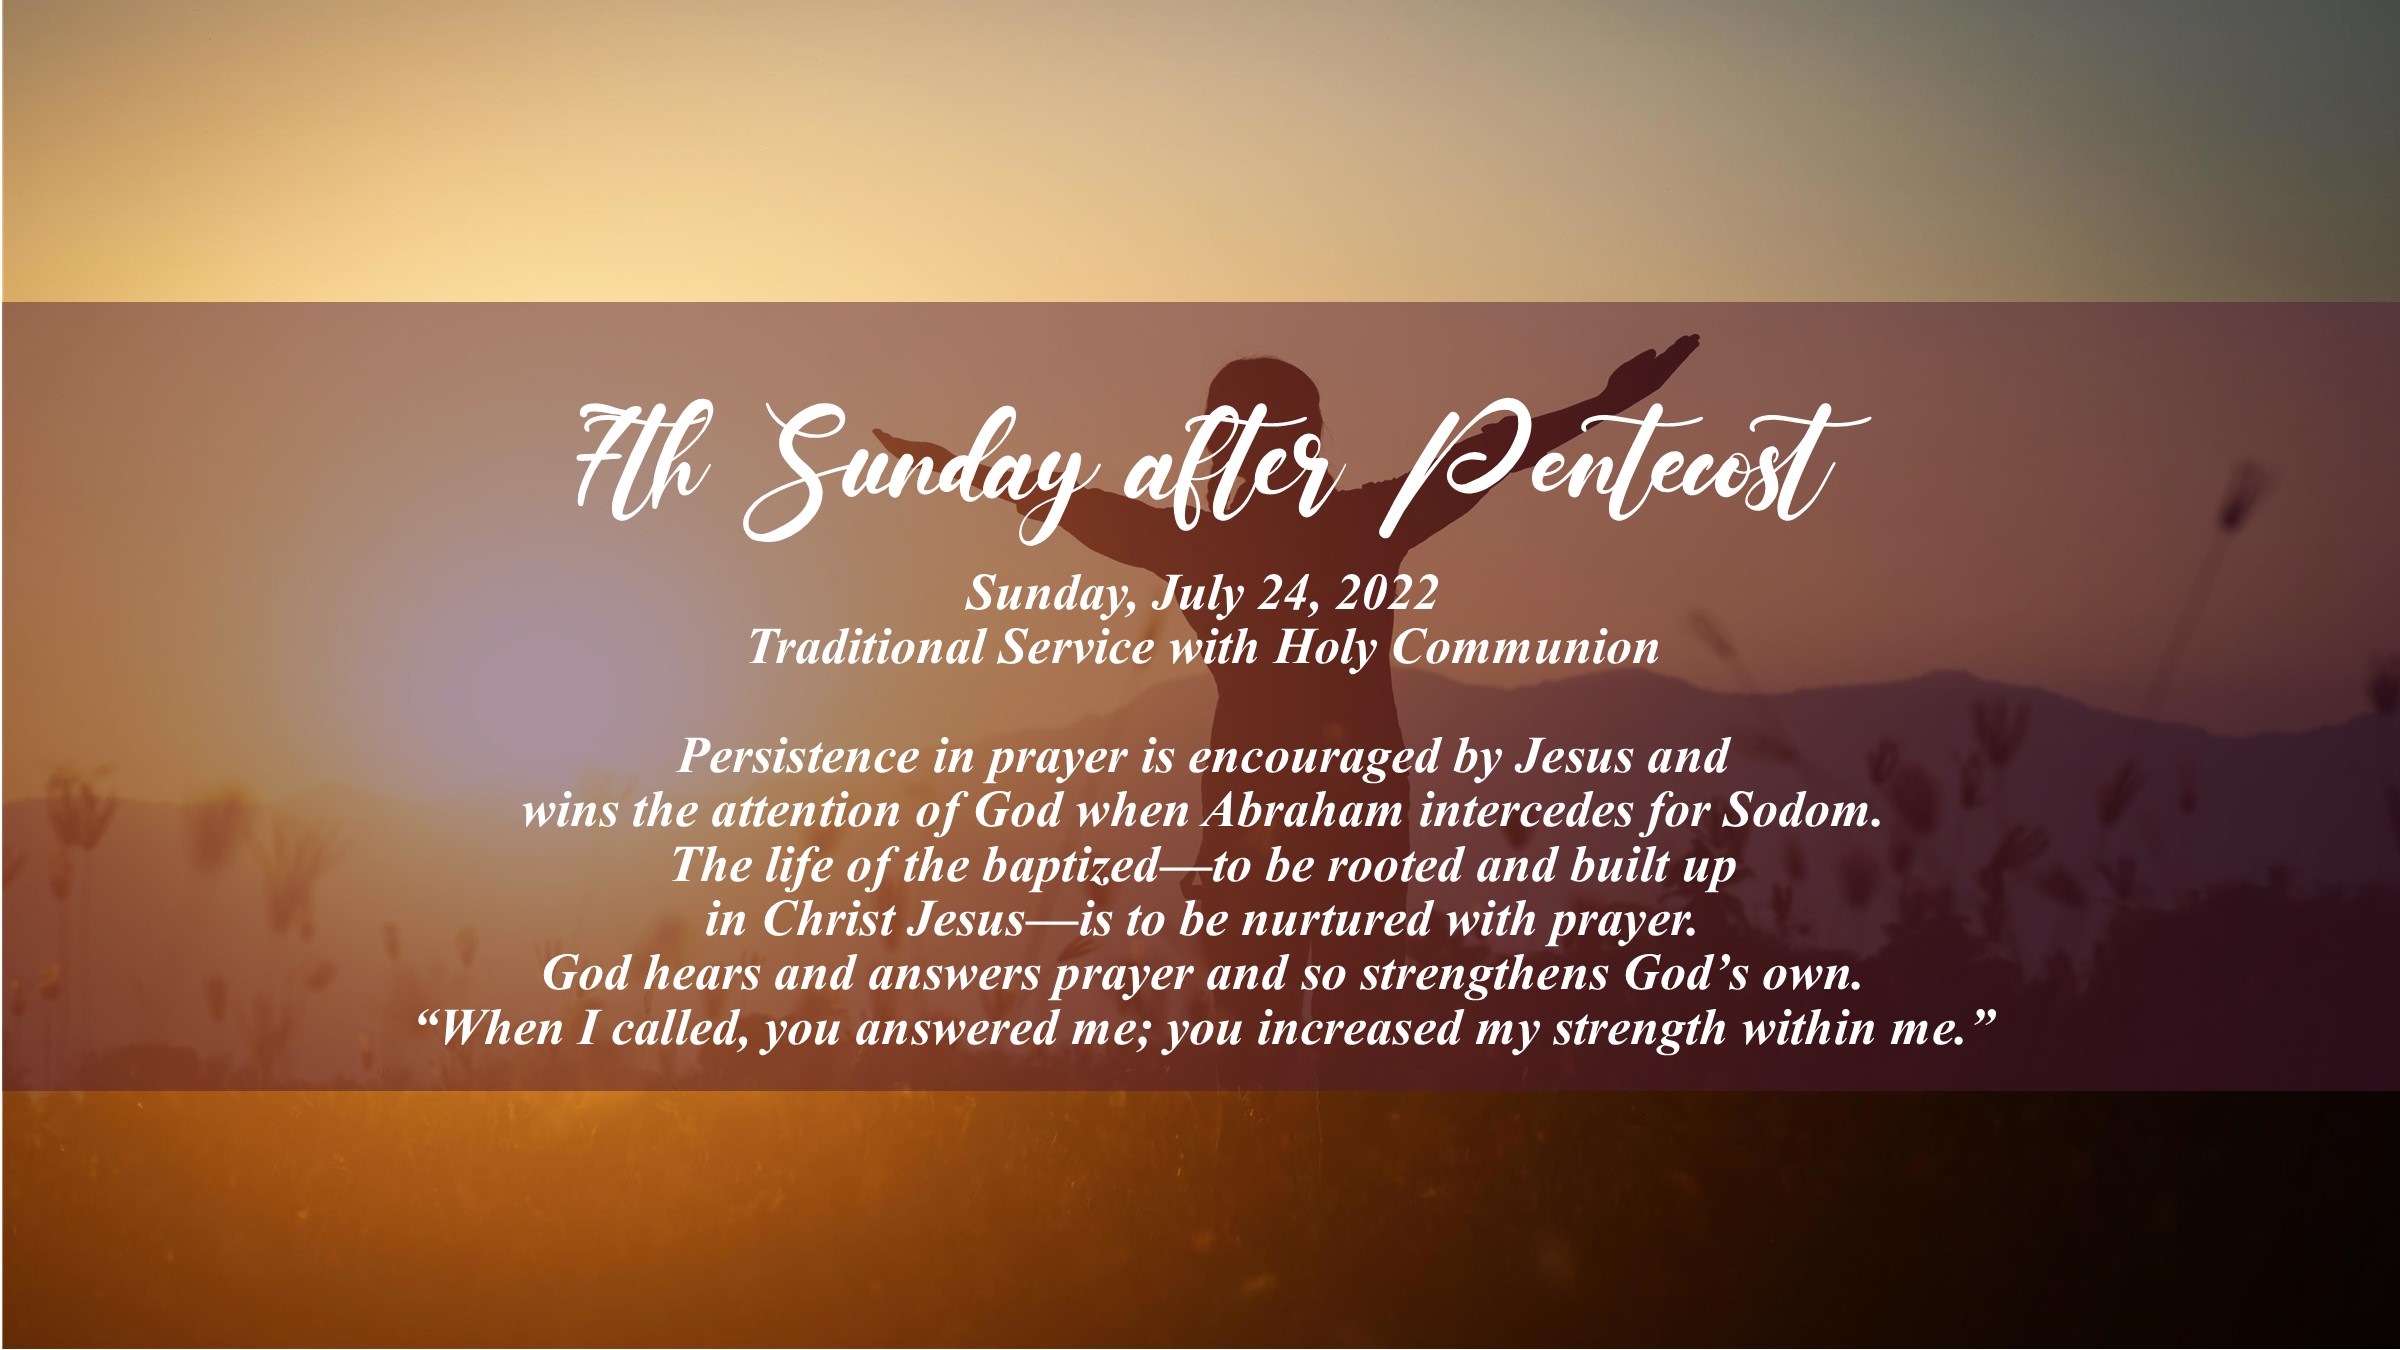 Streamed Worship Service 7th Sunday after Pentecost Trinity